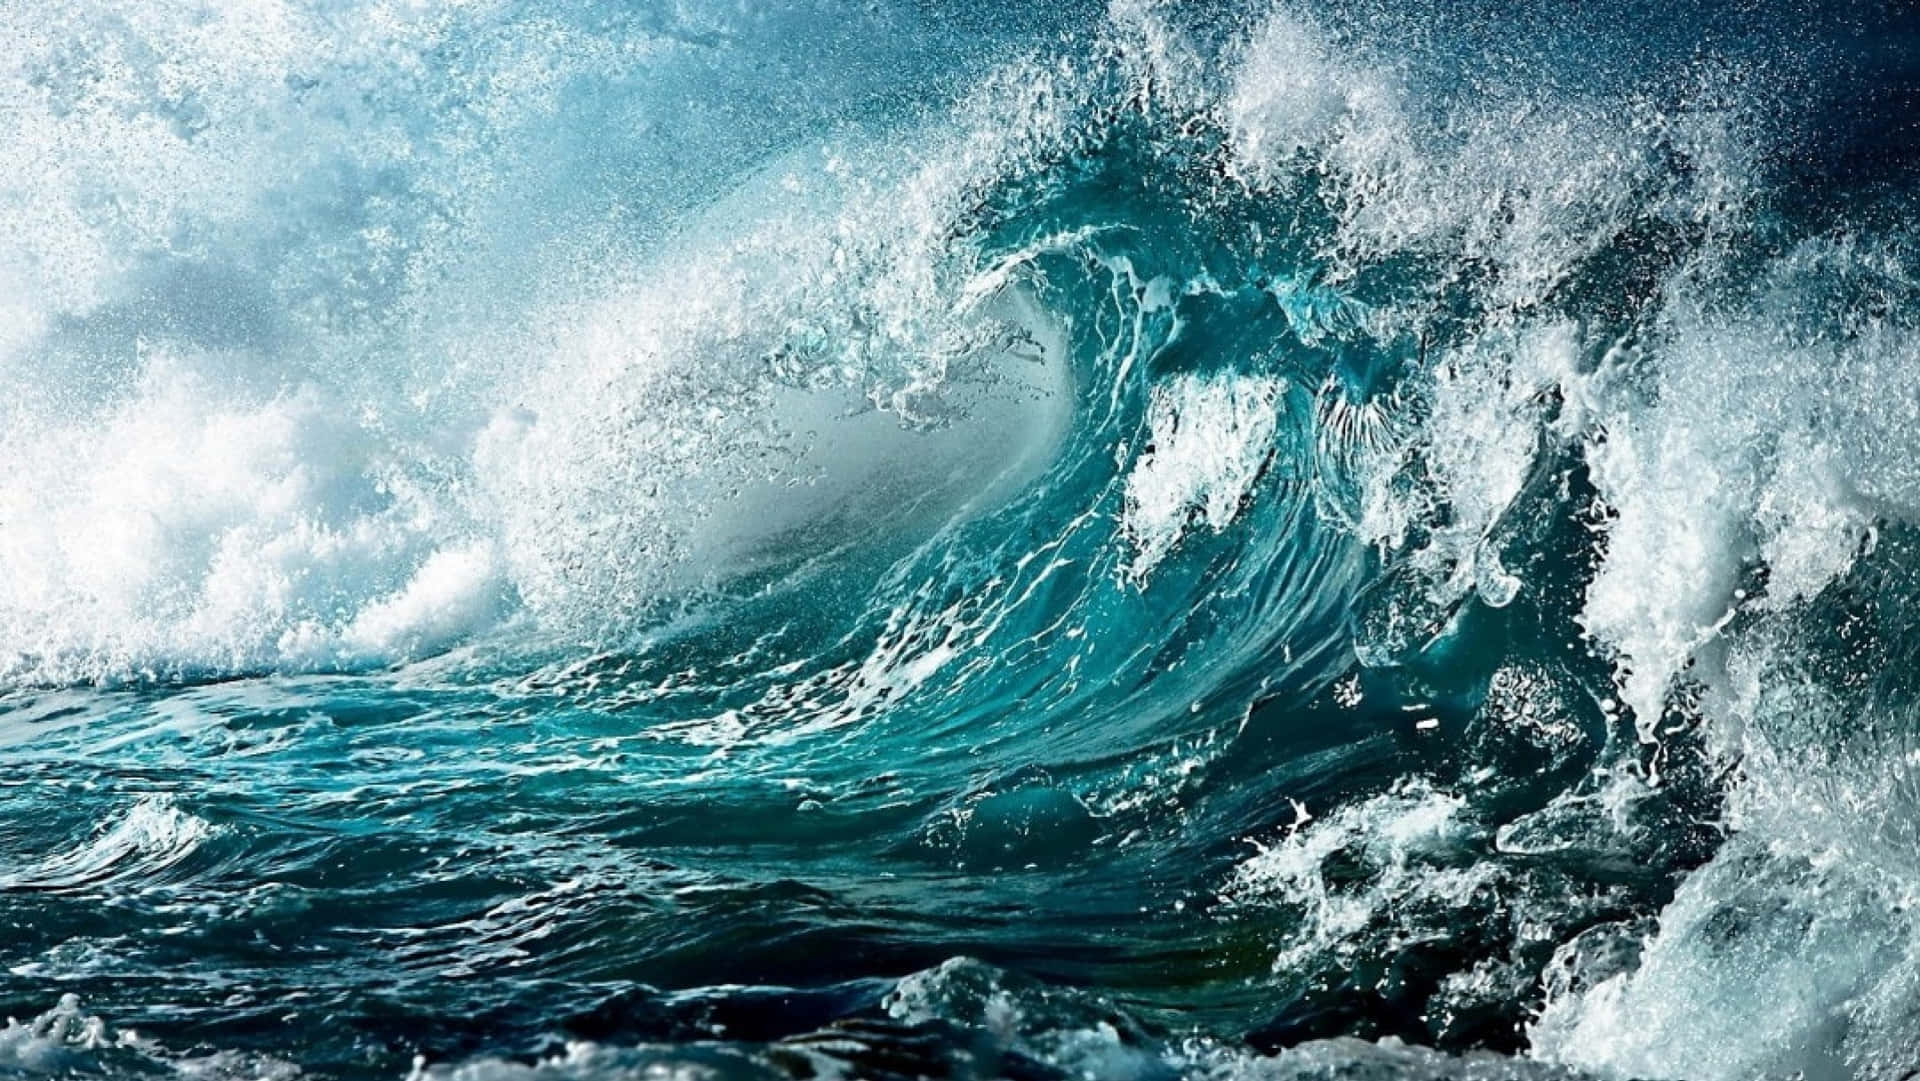 Majestic Force Of Nature - A Tsunami In Action Wallpaper